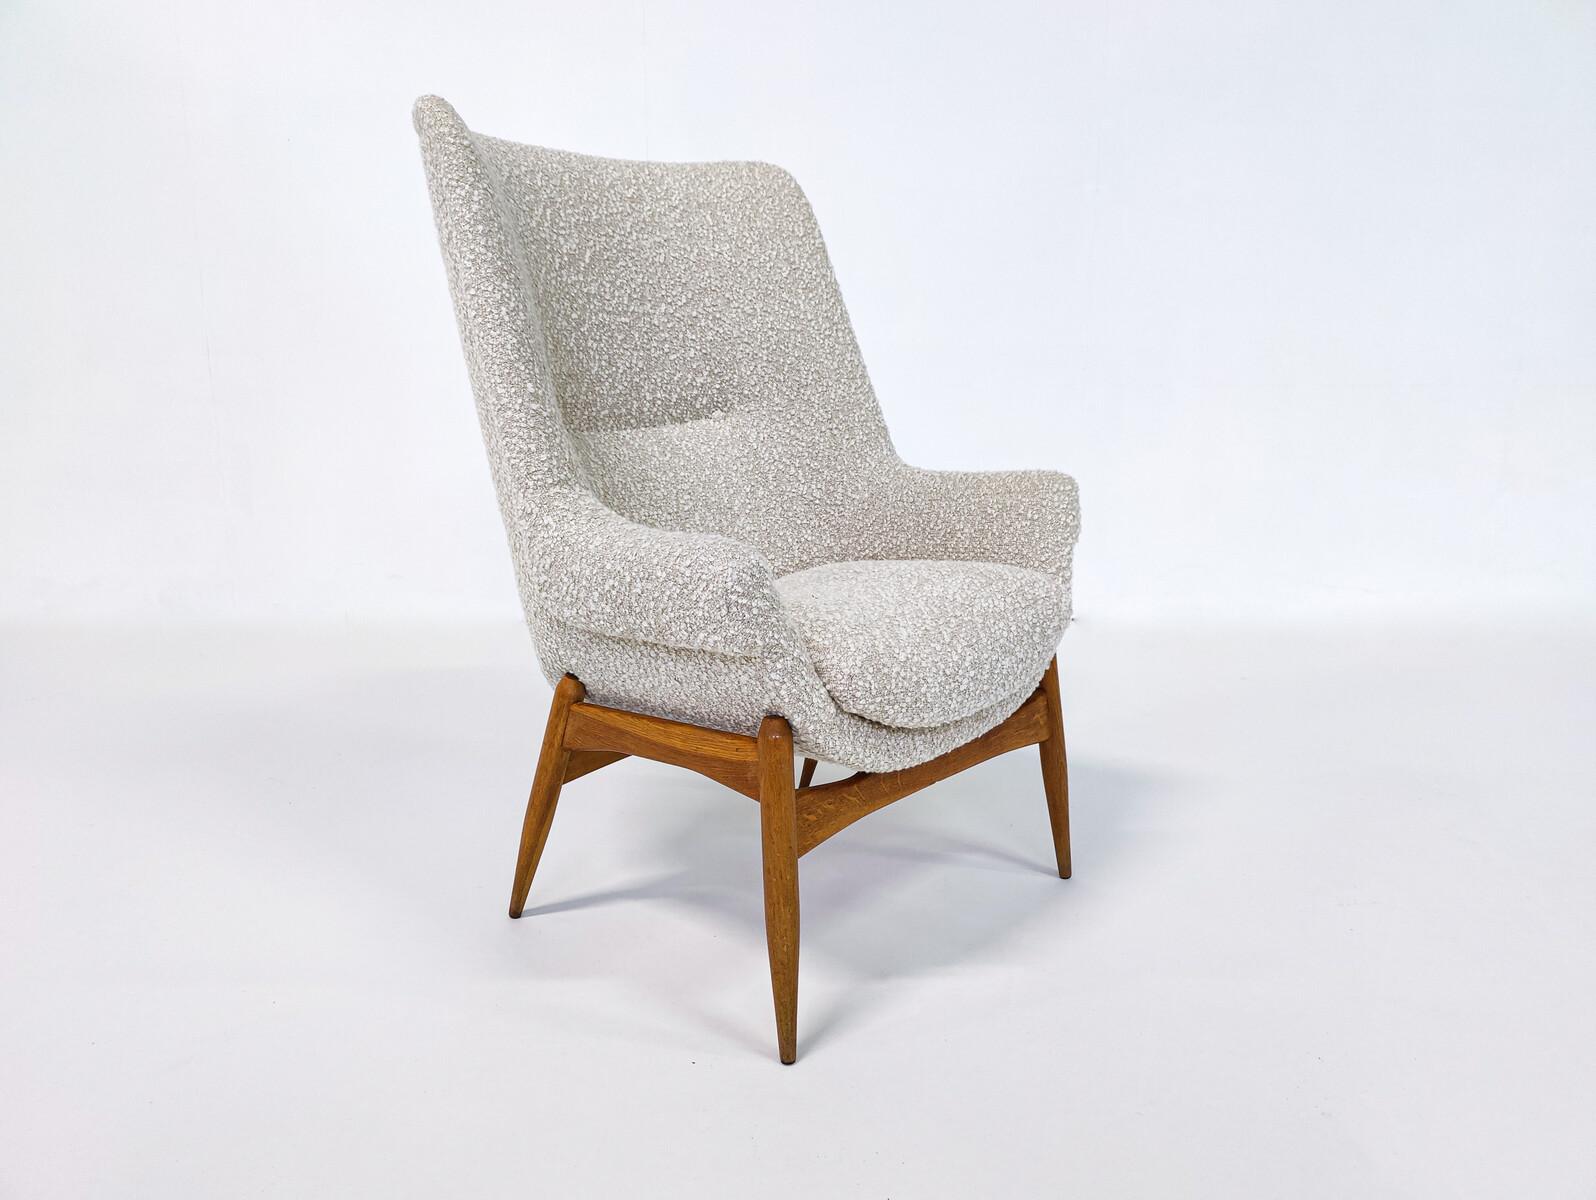 Pair of Mid-Century Modern Beige Fabric Armchairs by Julia Gaubek, Hungary, 1950 For Sale 2